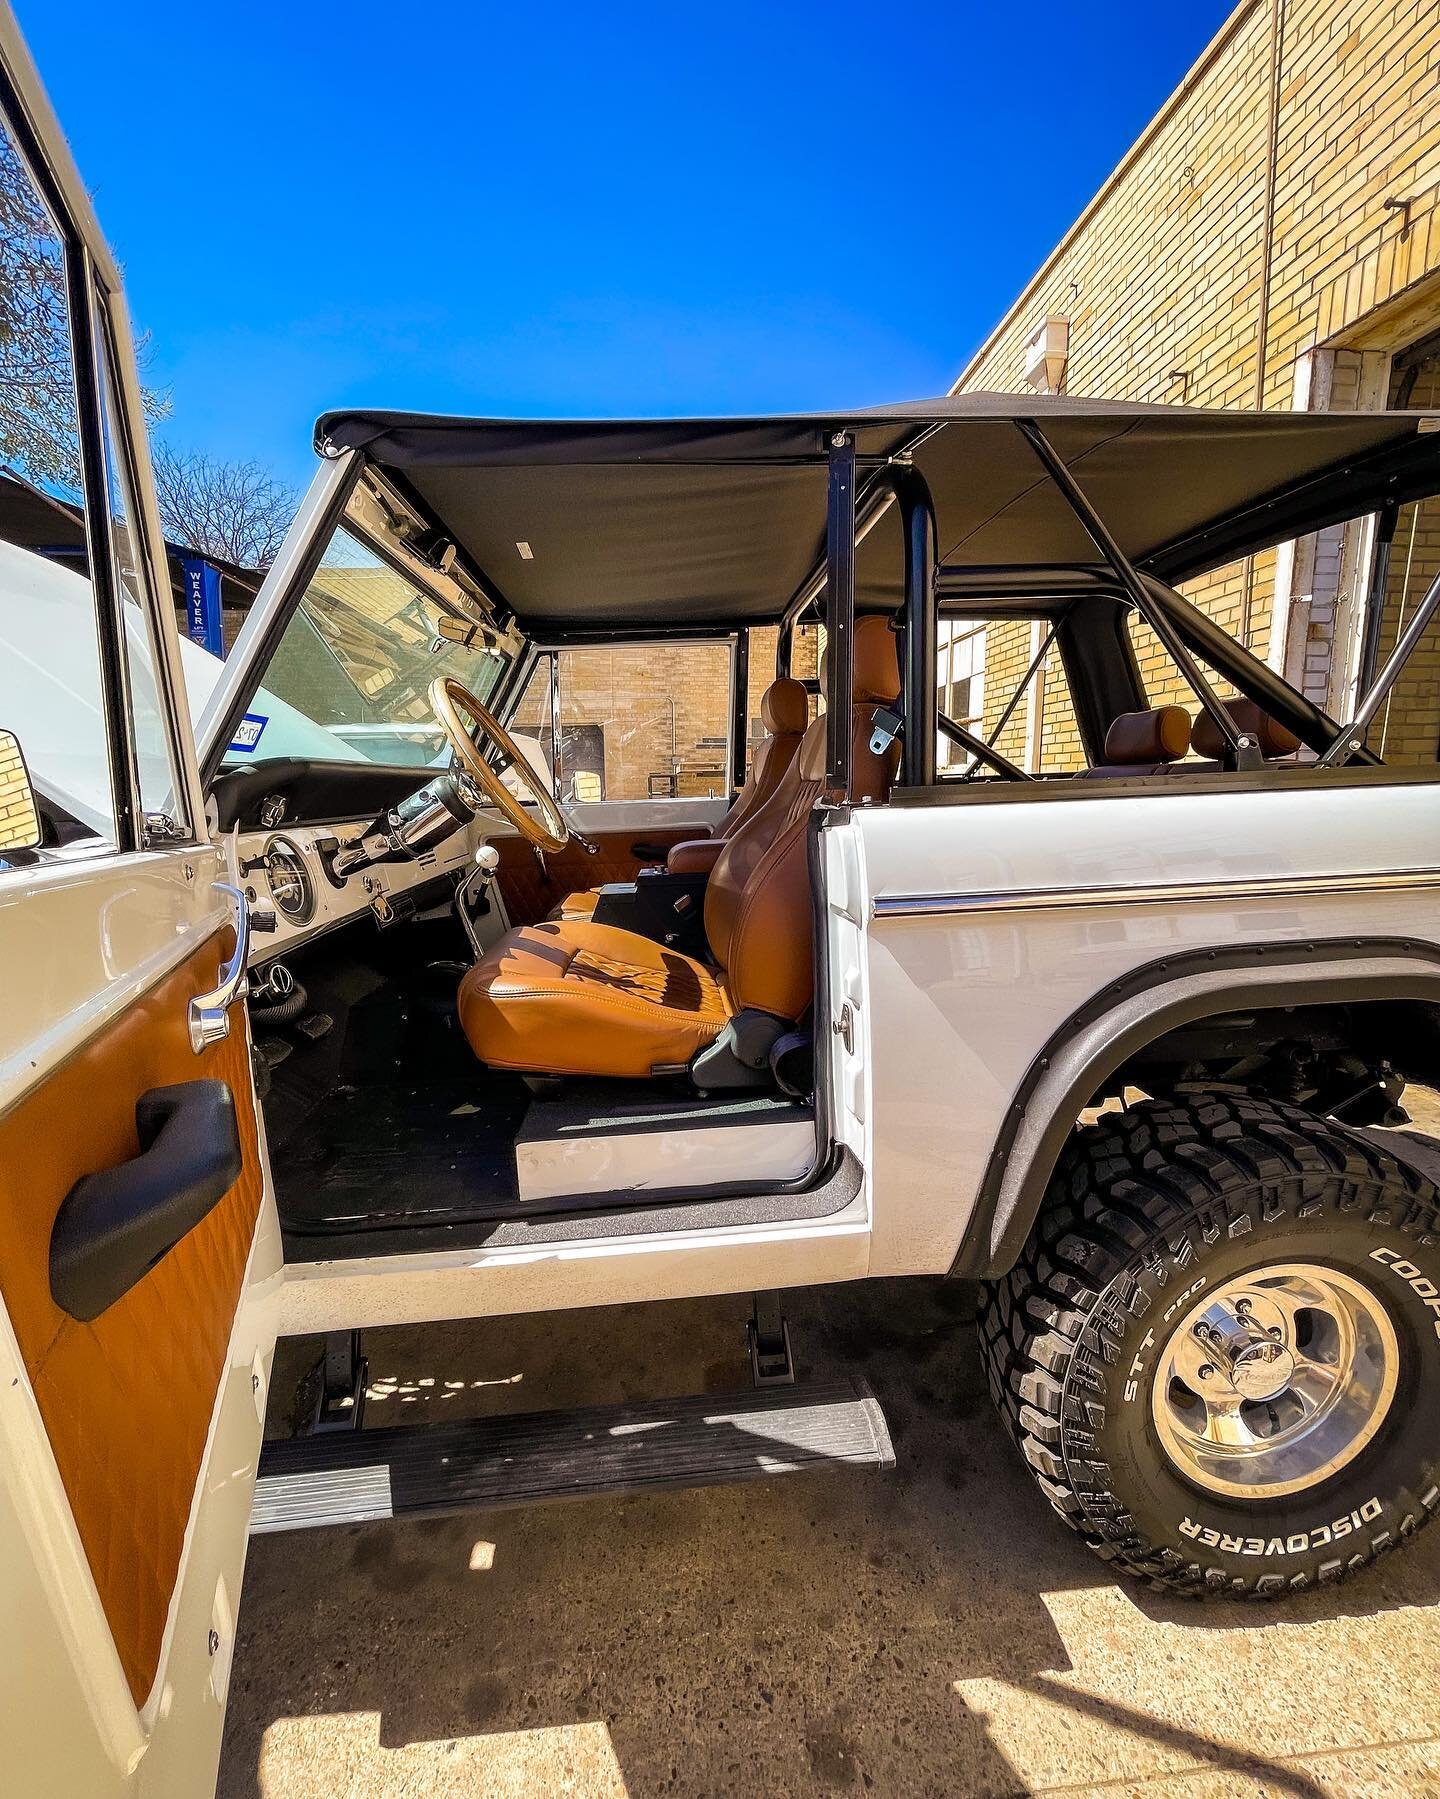 We have this sweet 1967 Bronco in the shop right now. It came in for a Vintage Air system. 🚙💨

This particular Bronco has been modernized with a stereo system, clean new leather seats and Amp Research electric steps. A video to come on the test dri